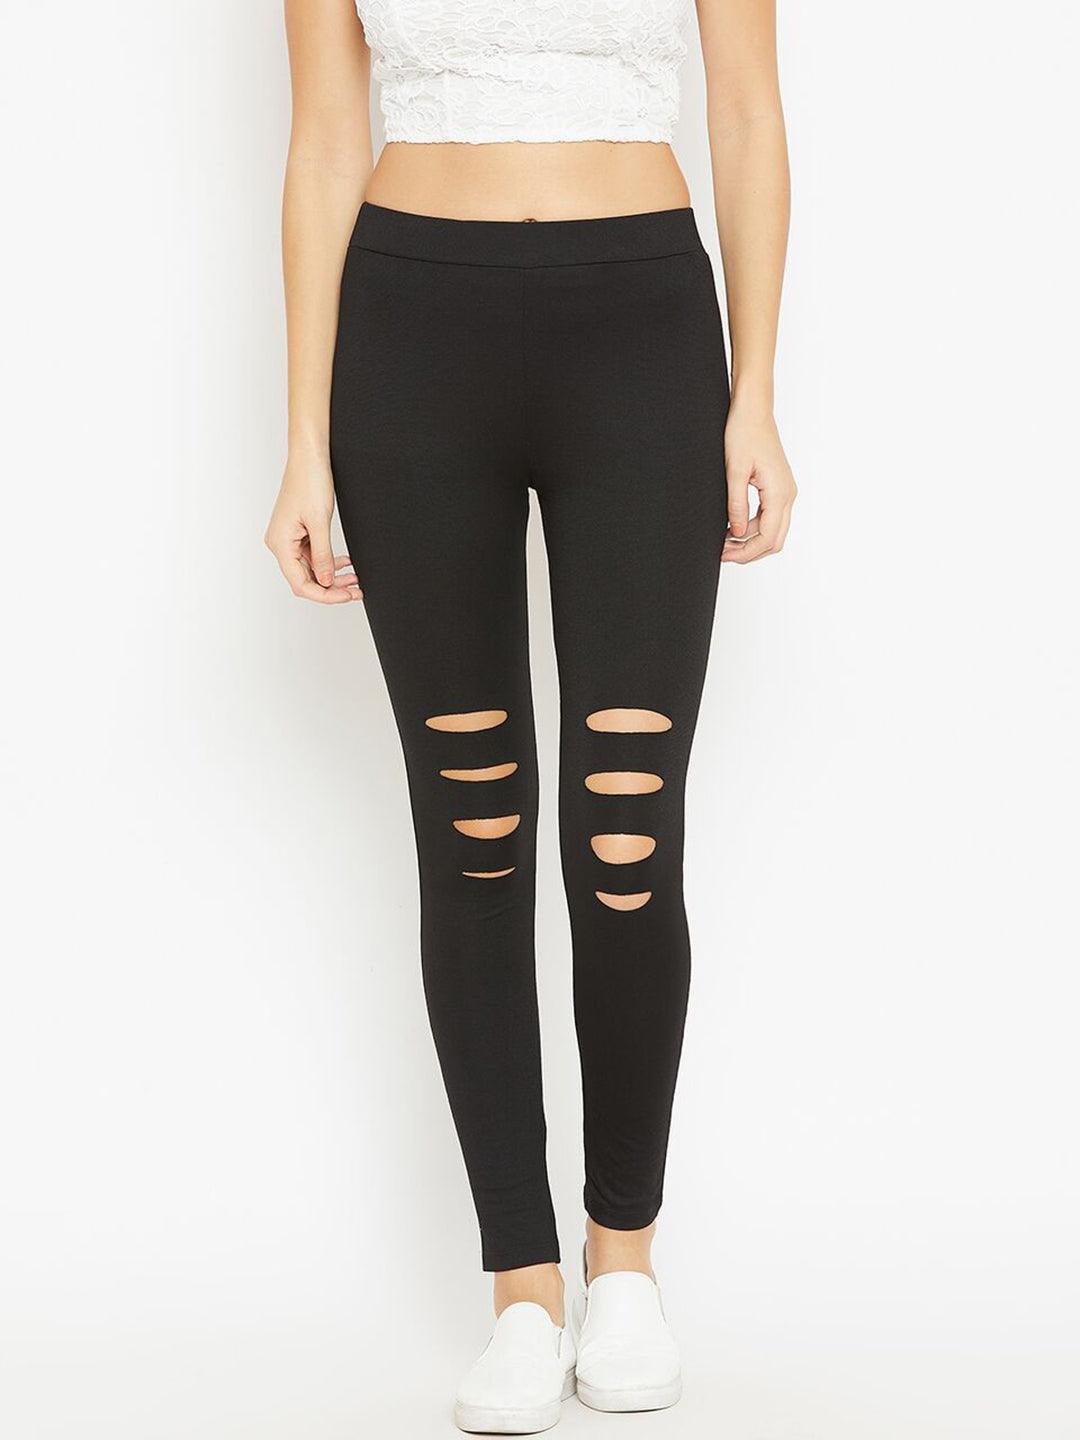 Asymmetrical Crop Top with Black solid cut out jegging - Znxclothing